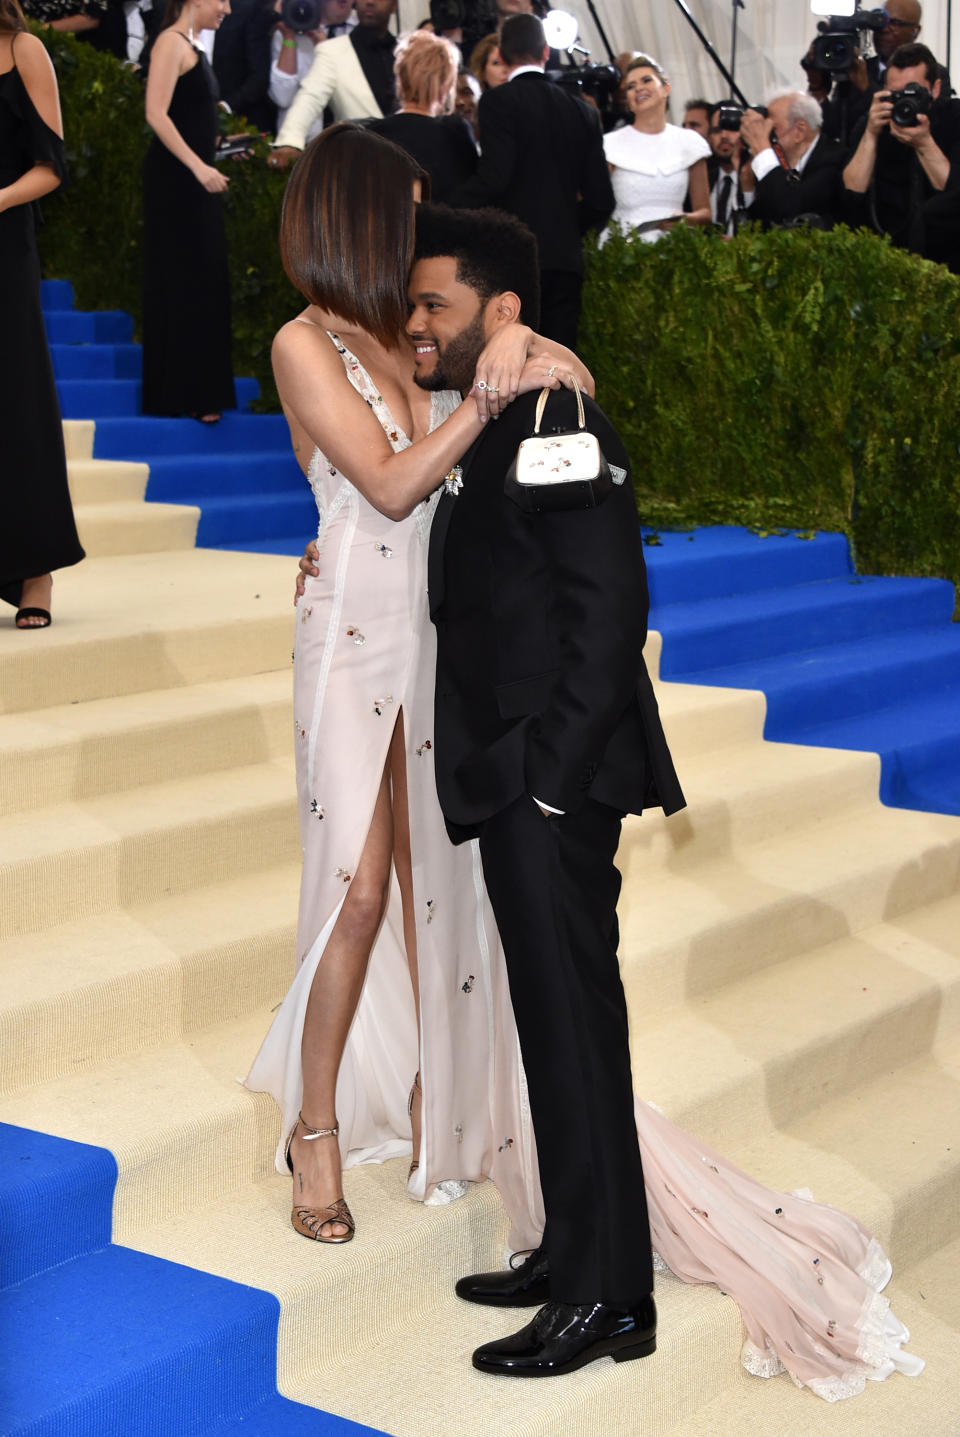 May: The Weeknd and Selena Make Their Red Carpet Debut at the Met Gala